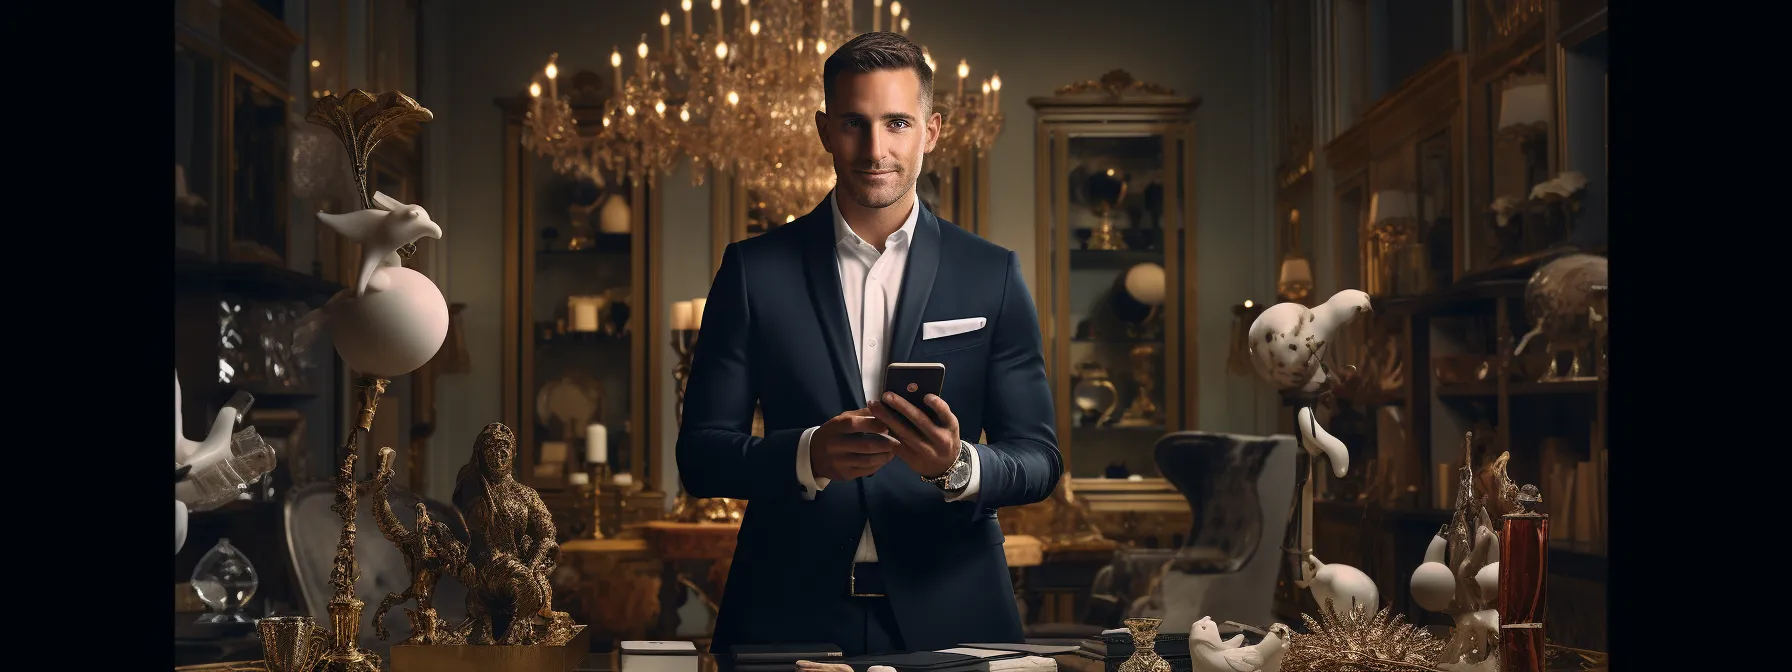 a well-dressed influencer holding a smartphone and smiling while surrounded by fashion-related objects.